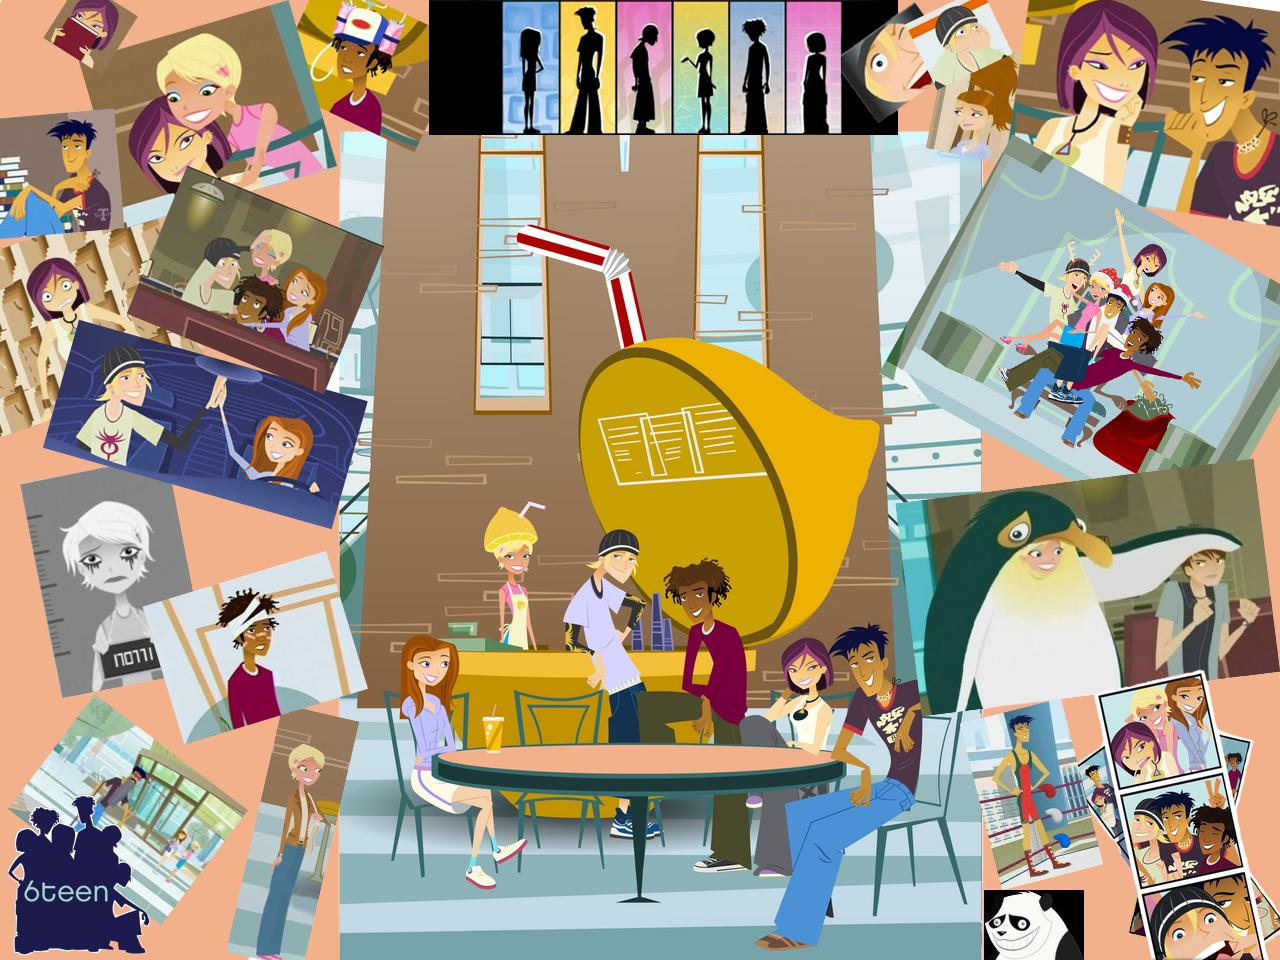 image about 6teen. See more about 6teen